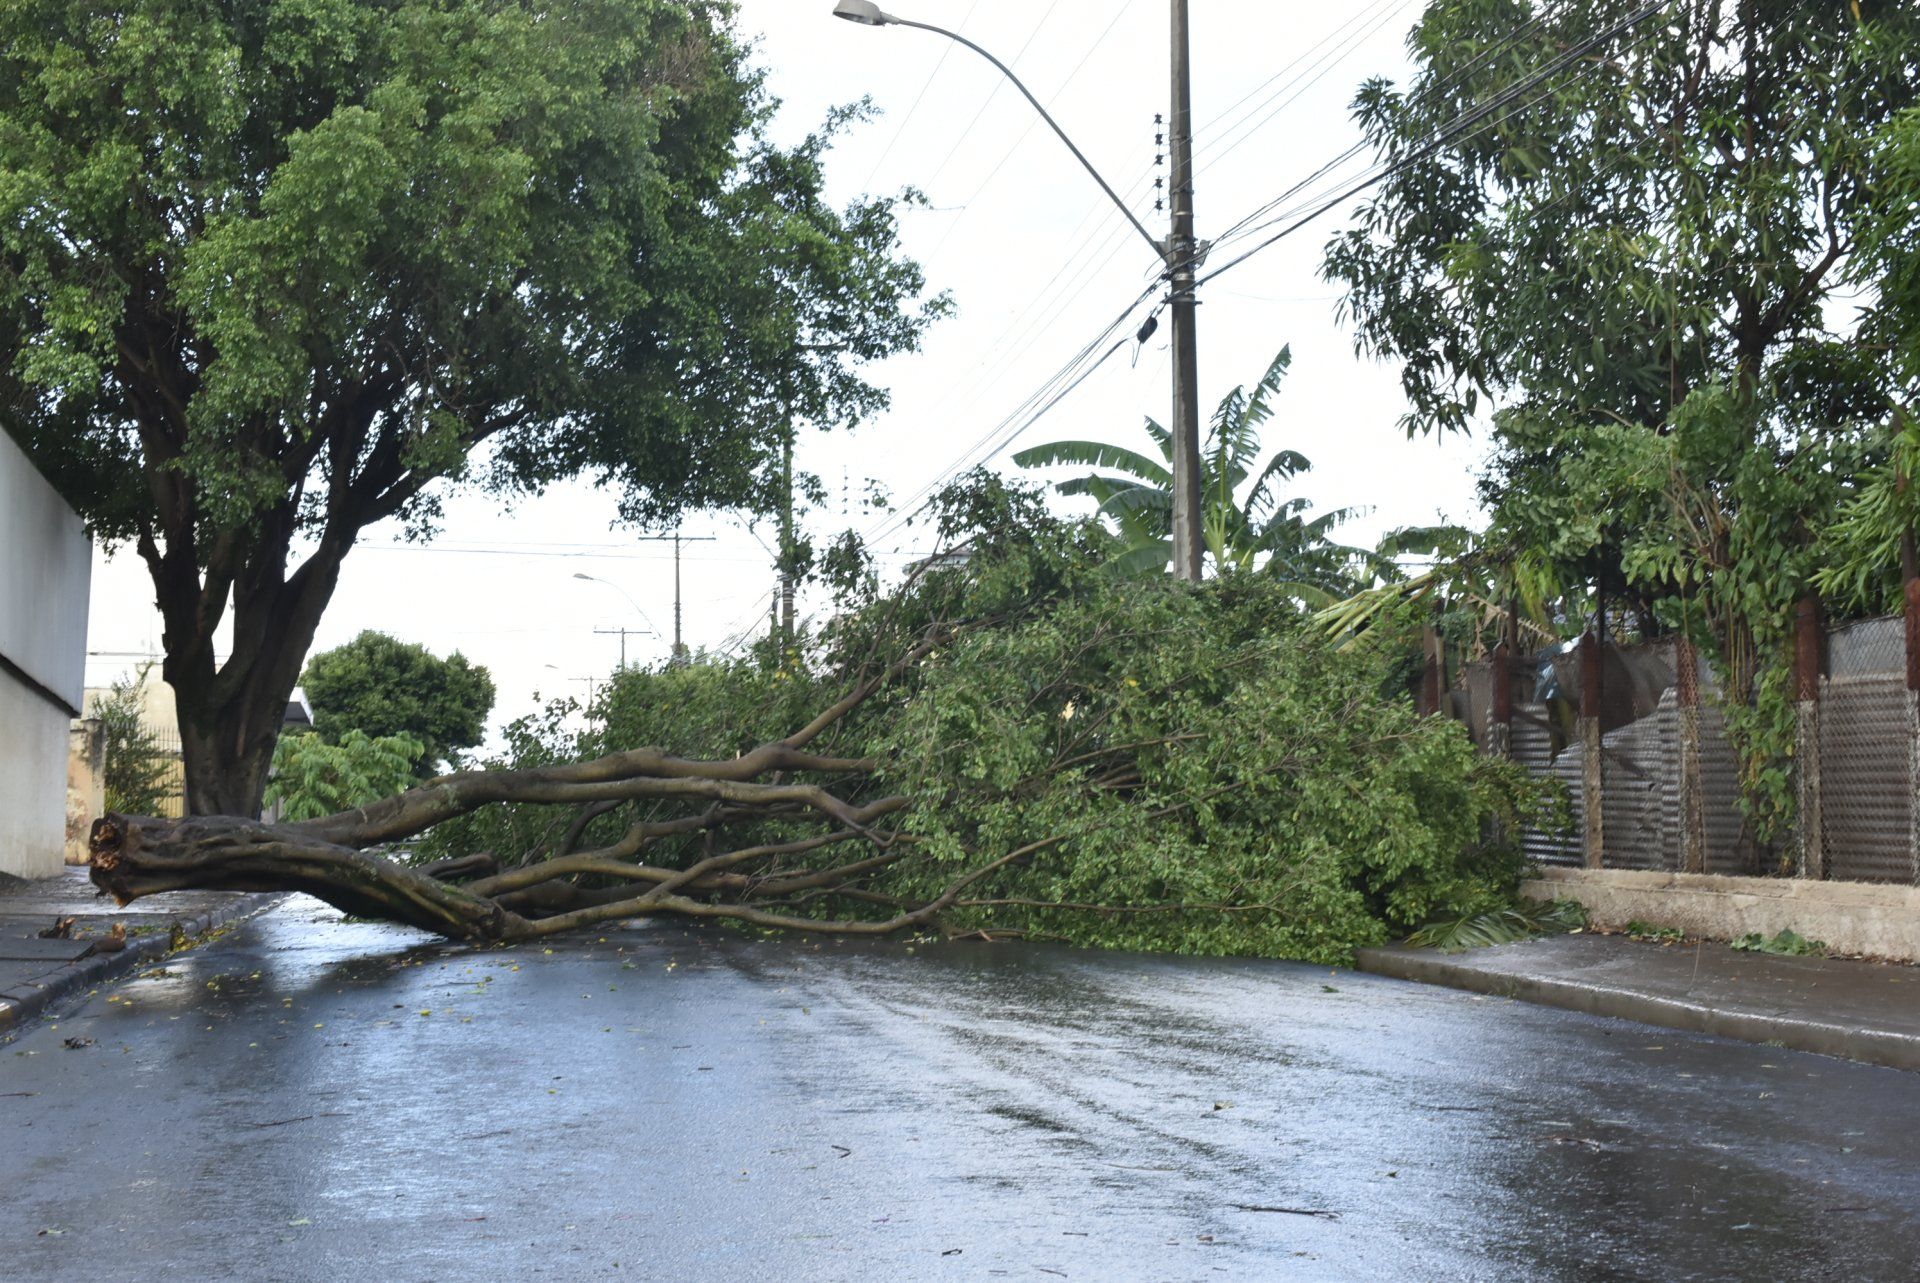 Image depicts a large tree that has fallen across a wet road, blocking the way for traffic flow.